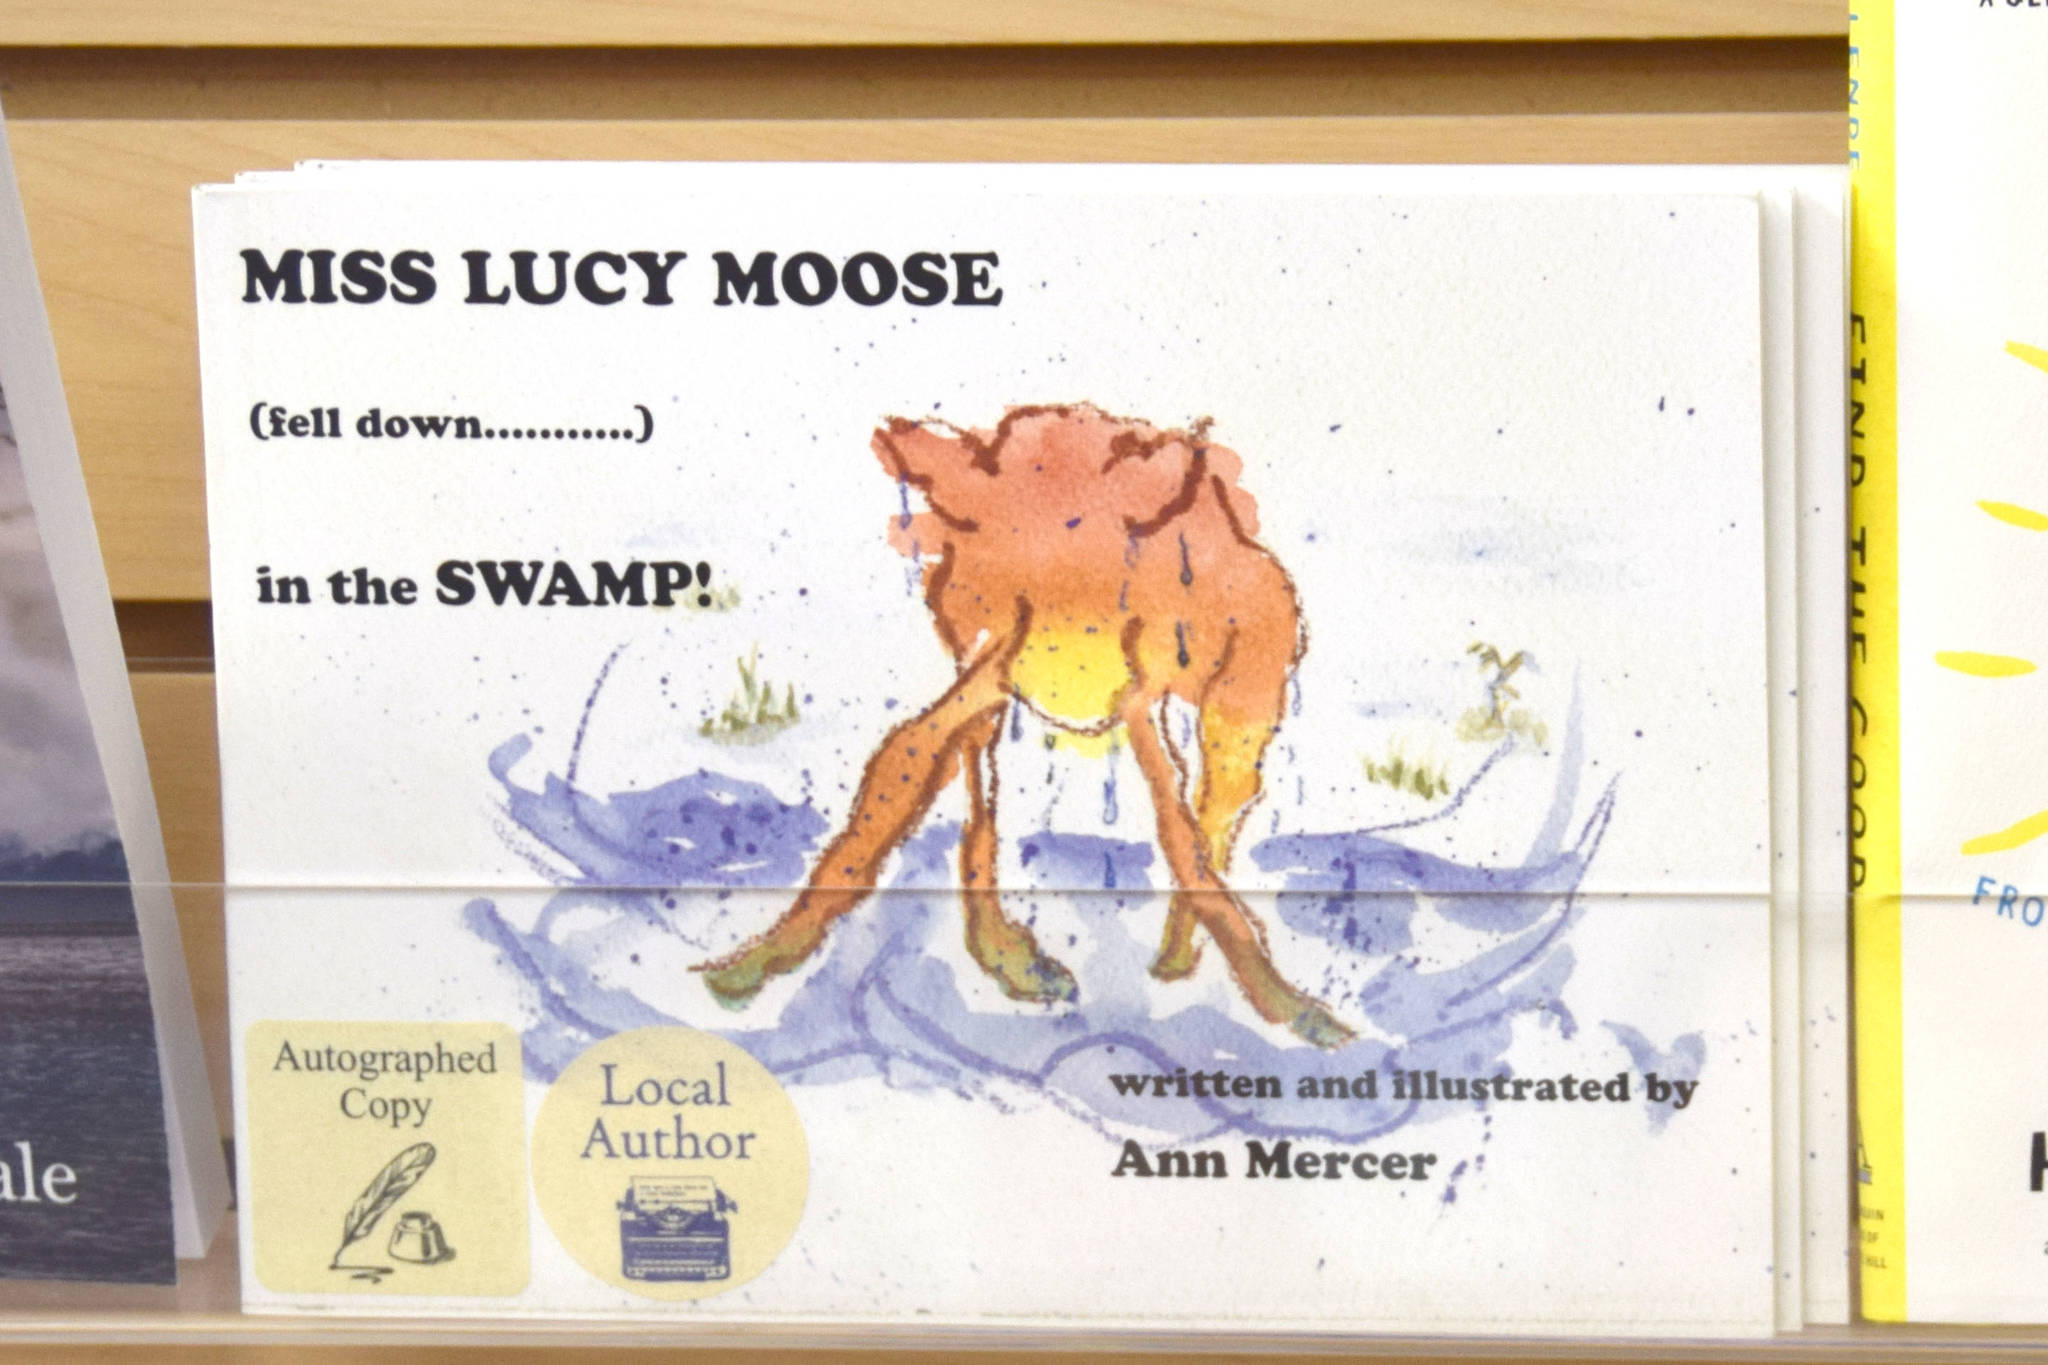 Local author Ann Mercer’s first book, “Miss Lucy Moose Falls Down in the Swamp” sits on the shelves of River City Books in Soldotna. (Photo by Brian Mazurek/Peninsula Clarion)